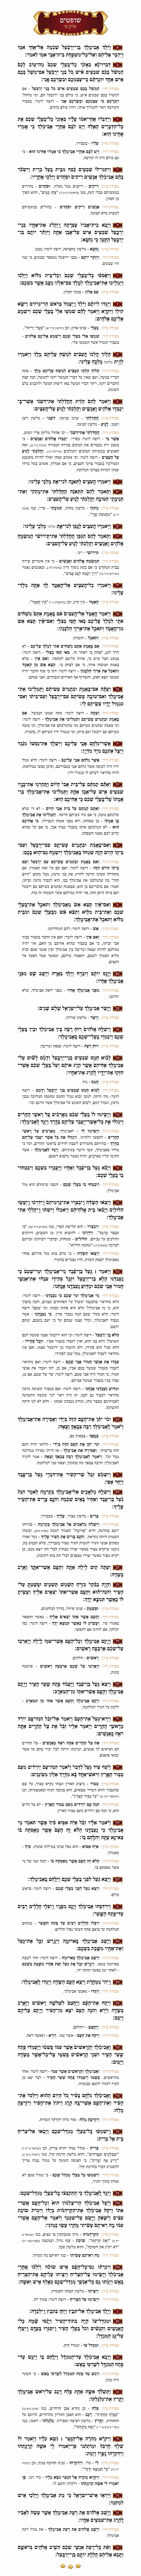 Sefer Shoftim Chapter 9 with commentary